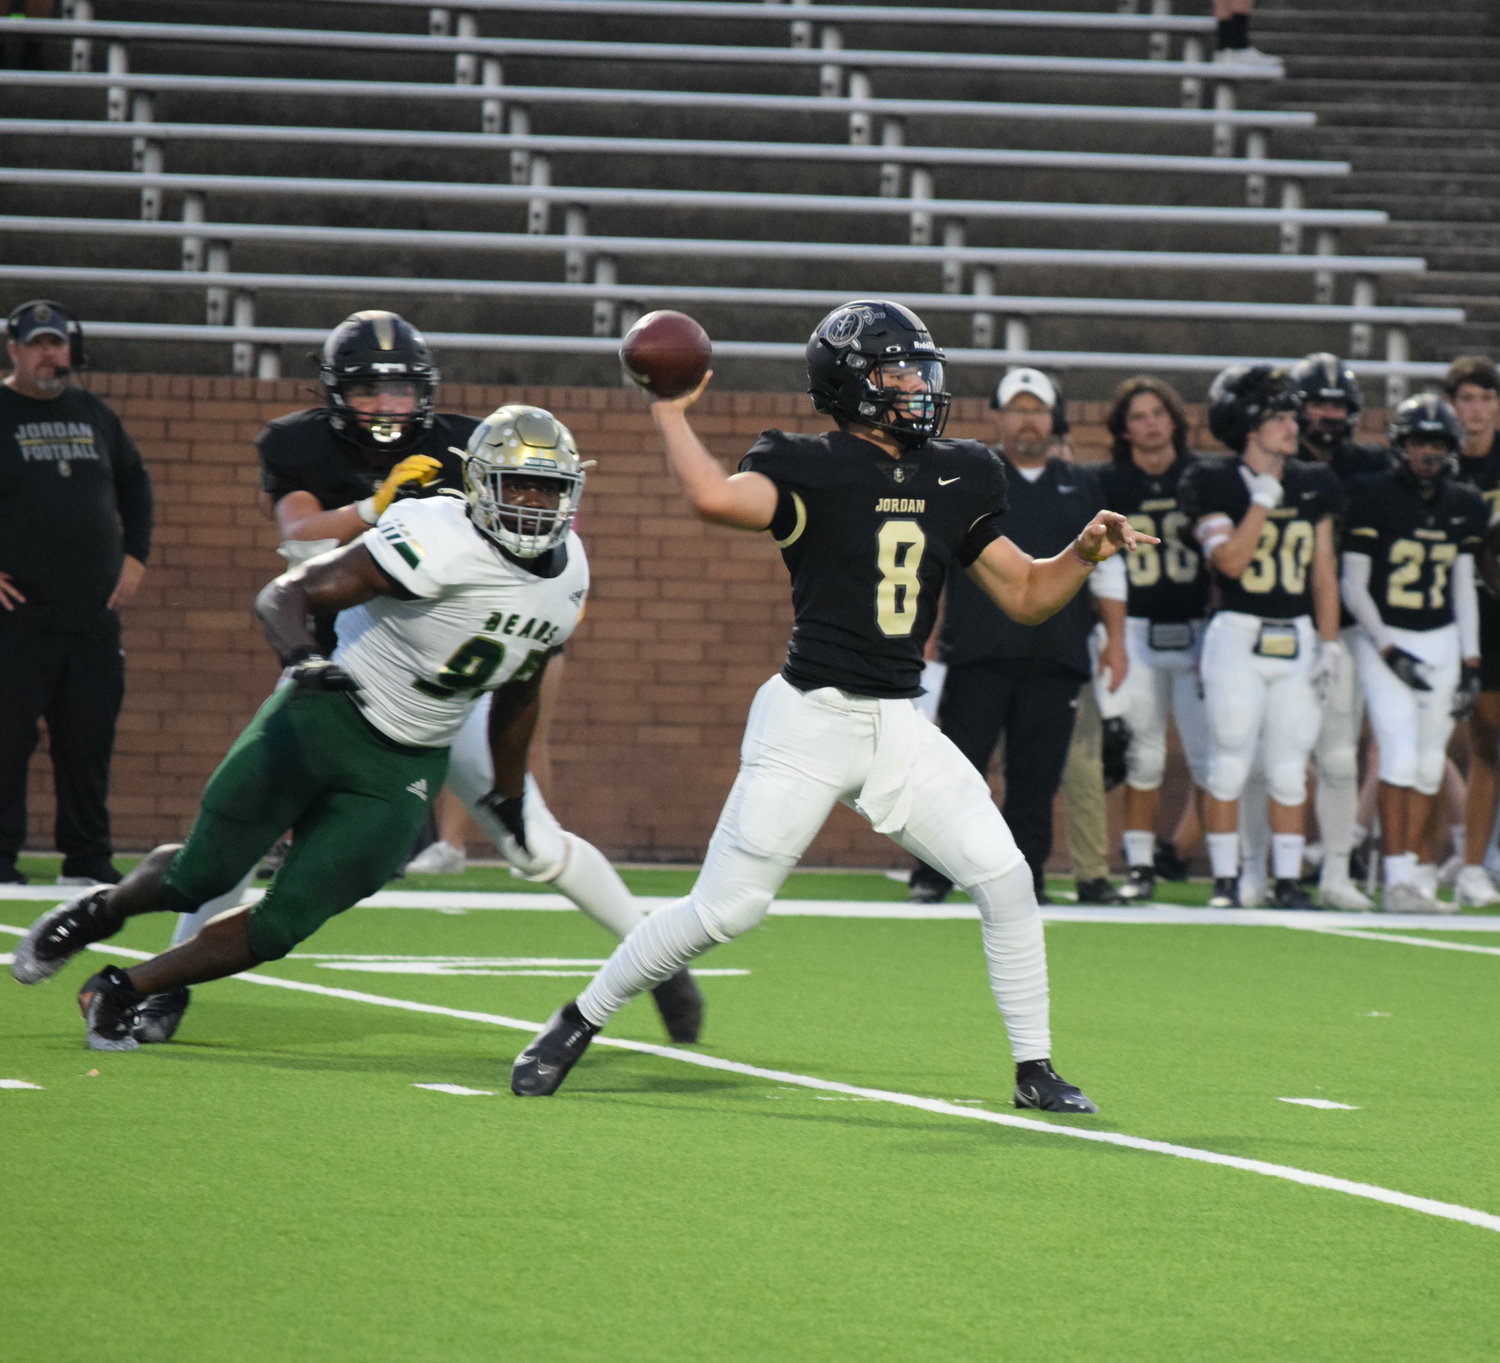 Jordan’s Colin Willetts throws a pass during a game against Little Cypress-Mauriceville on Thursday at Rhodes Stadium.